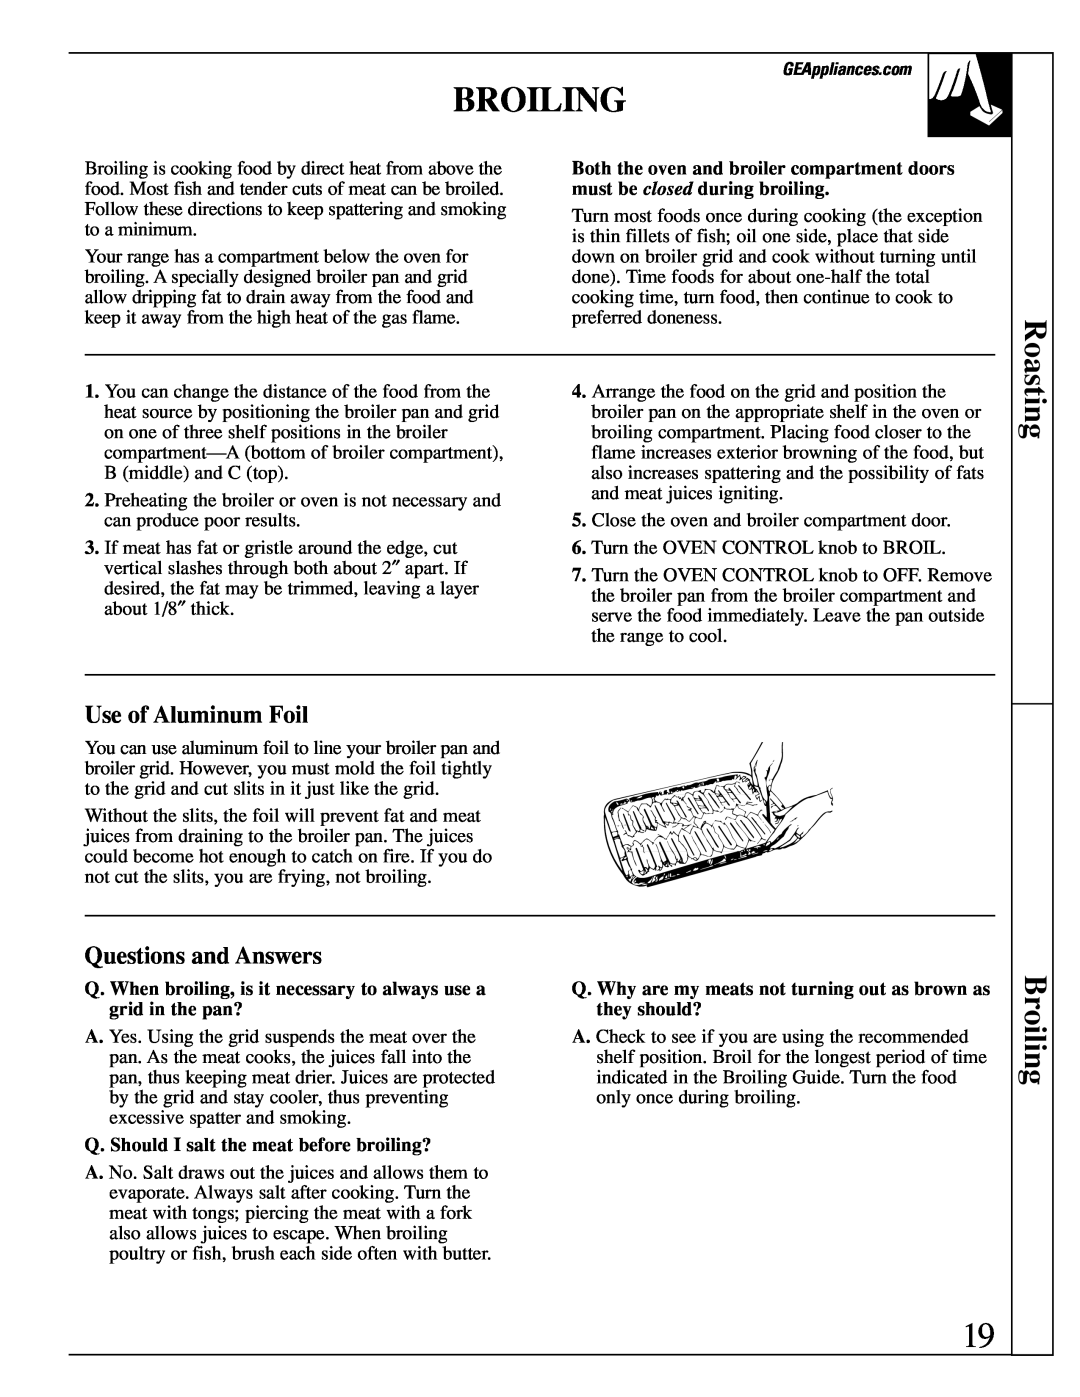 GE XL44 manual Broiling, Use of Aluminum Foil, Questions and Answers, Q. Should I salt the meat before broiling? 